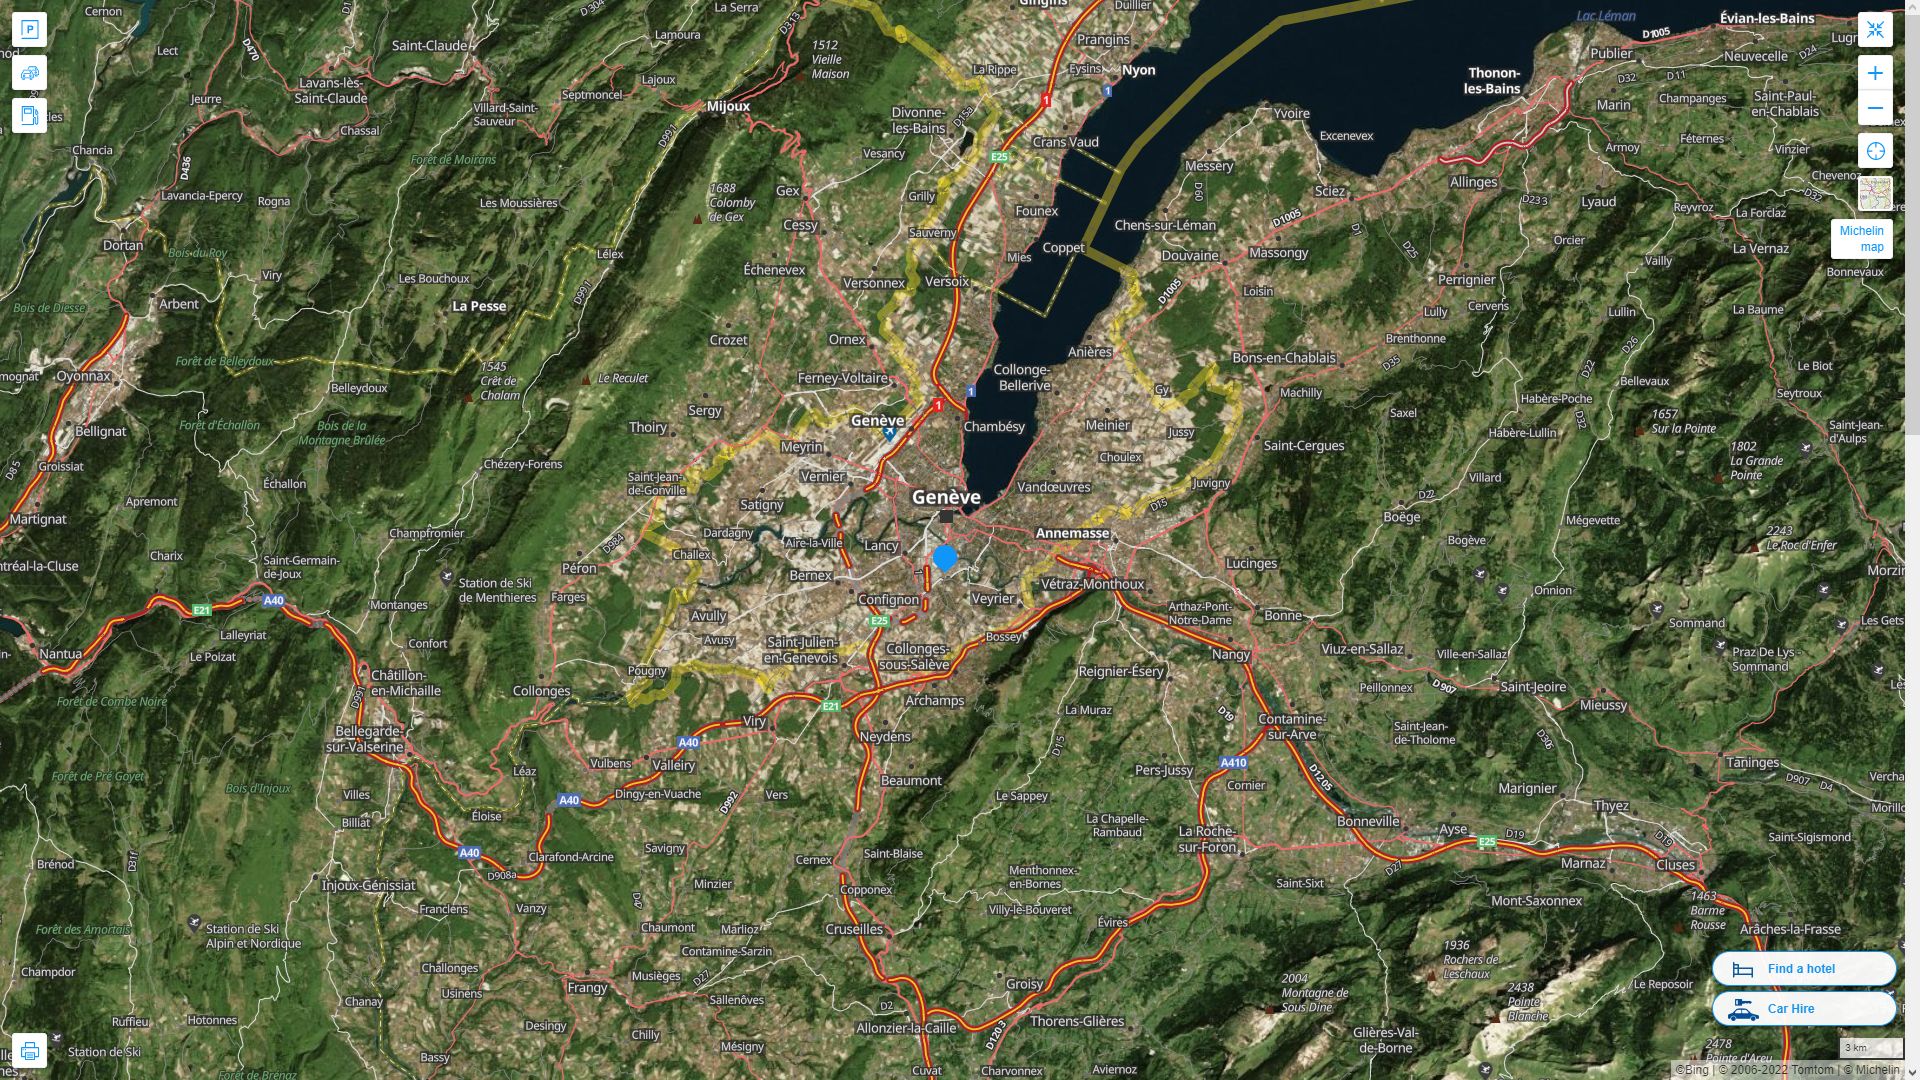 Carouge Highway and Road Map with Satellite View